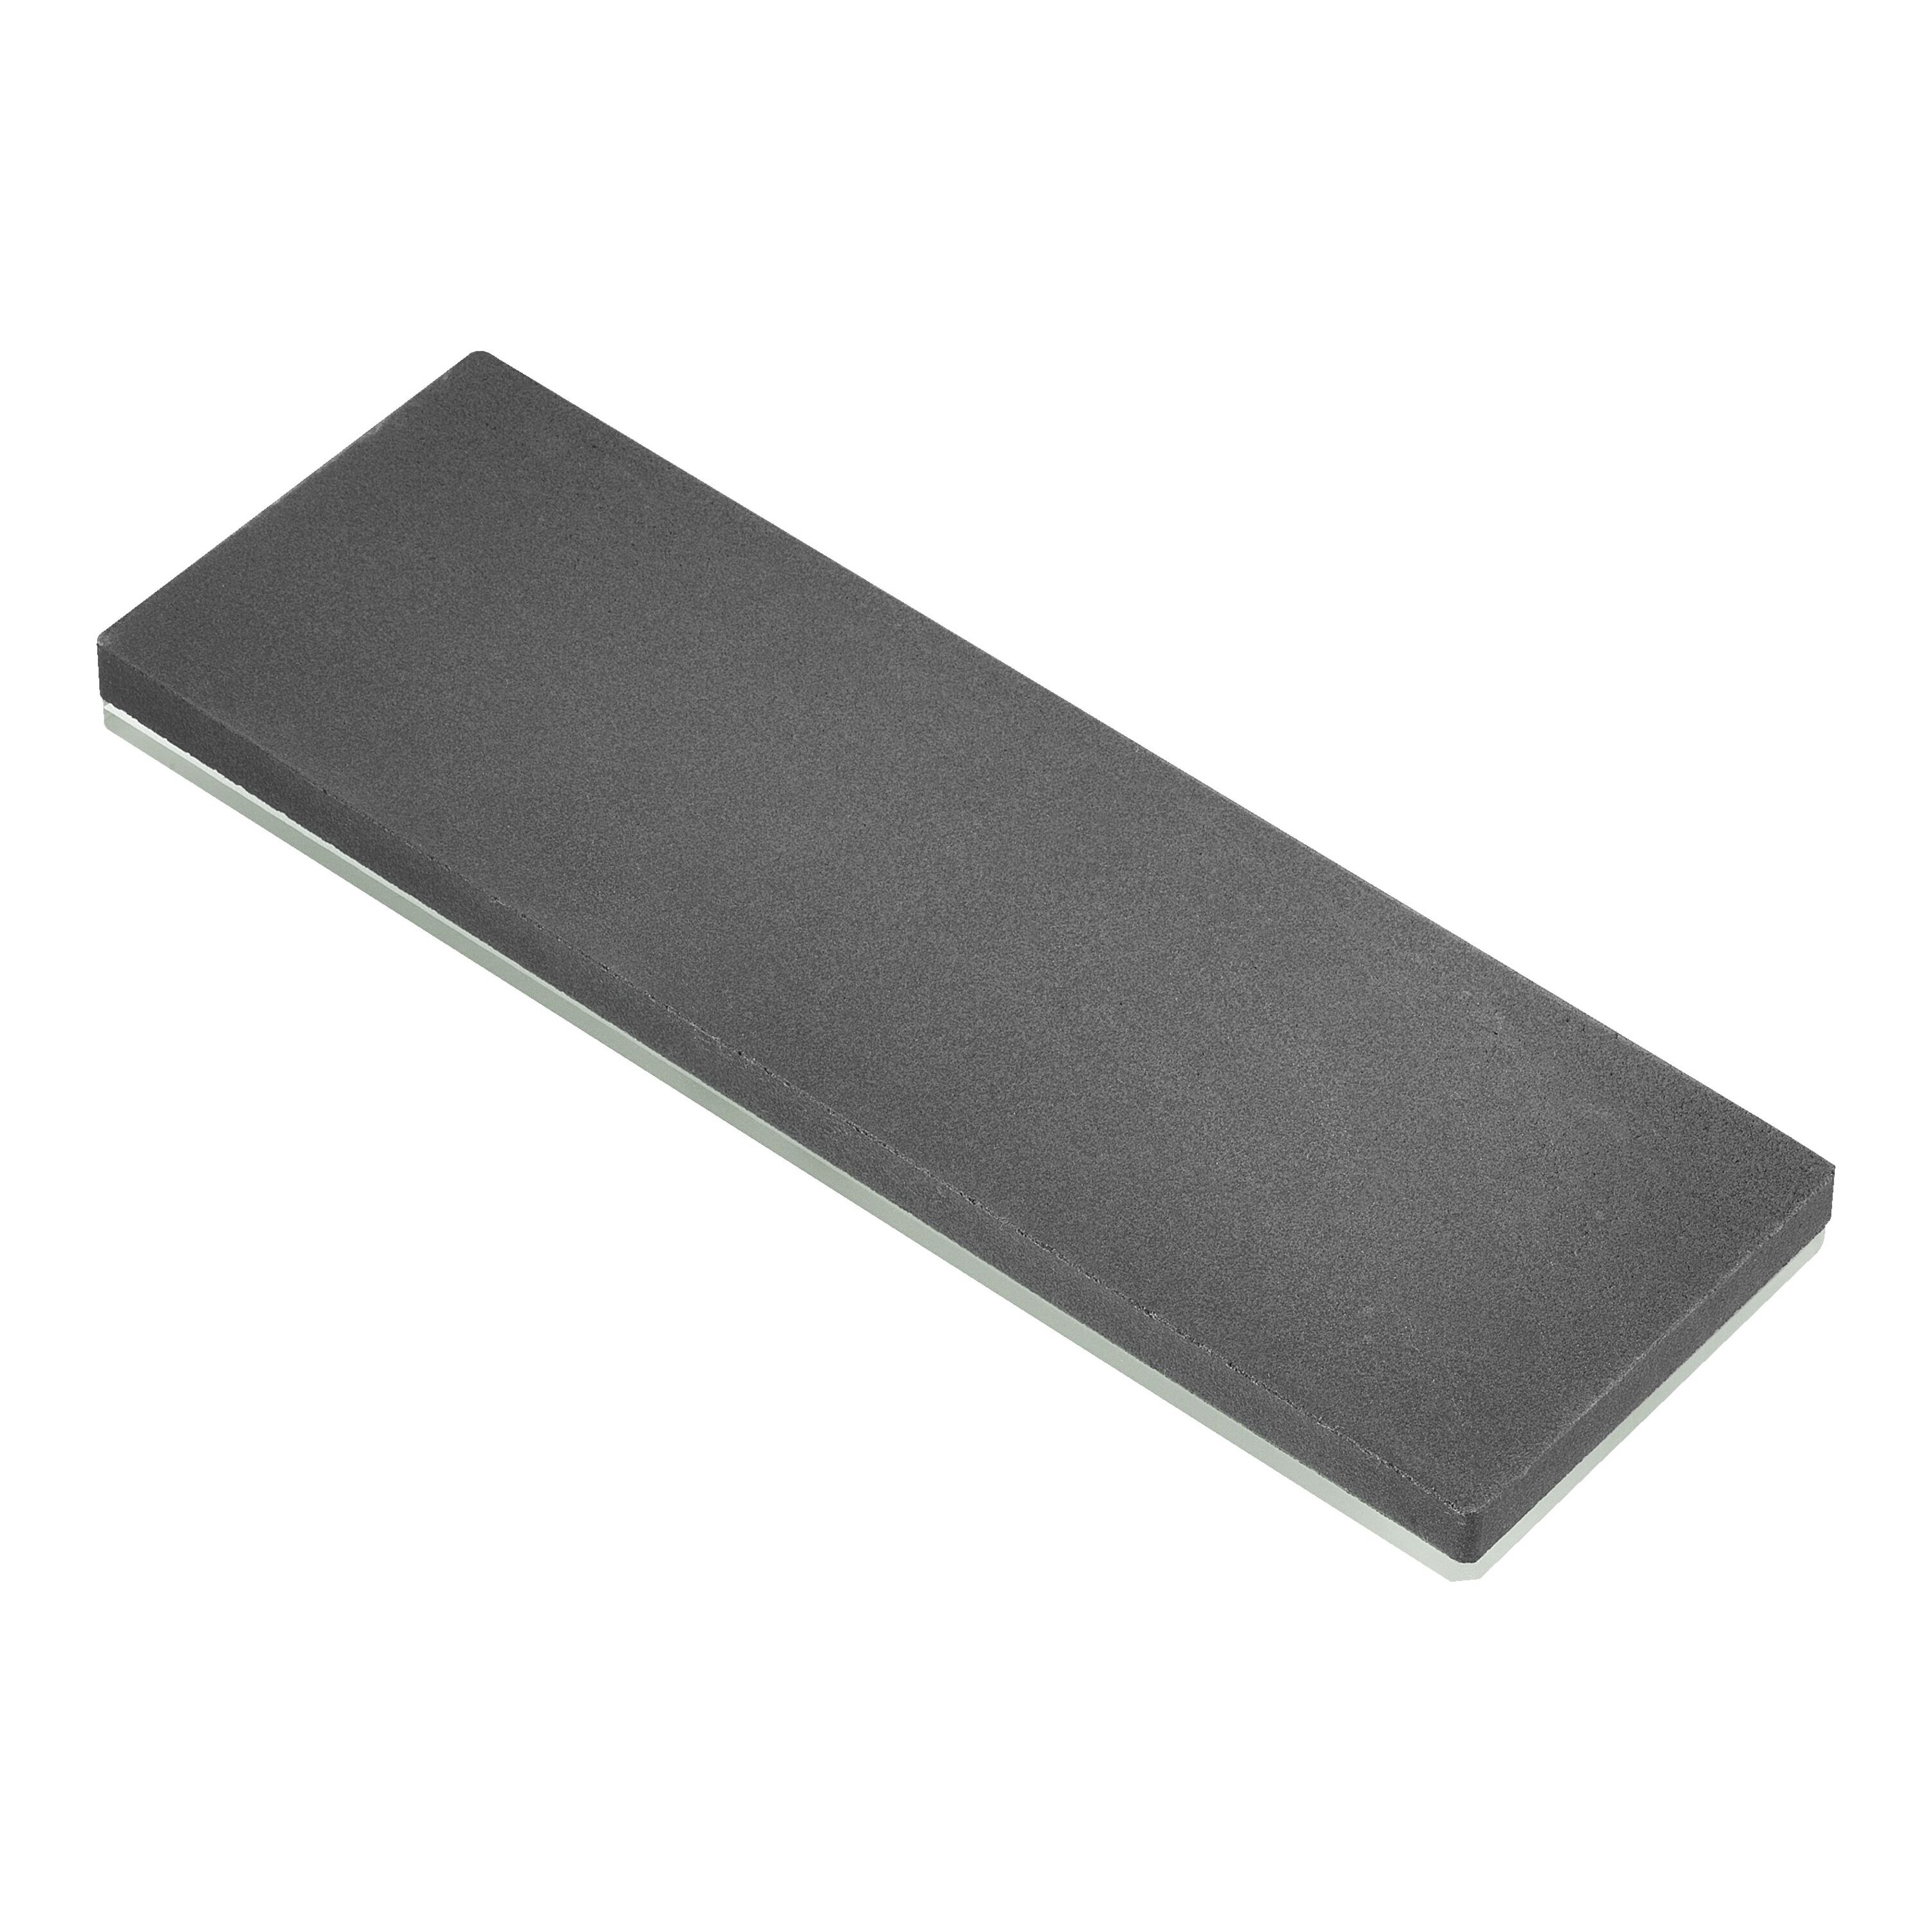 Kramer by Zwilling 5000 Grit Glass Water Sharpening Stone